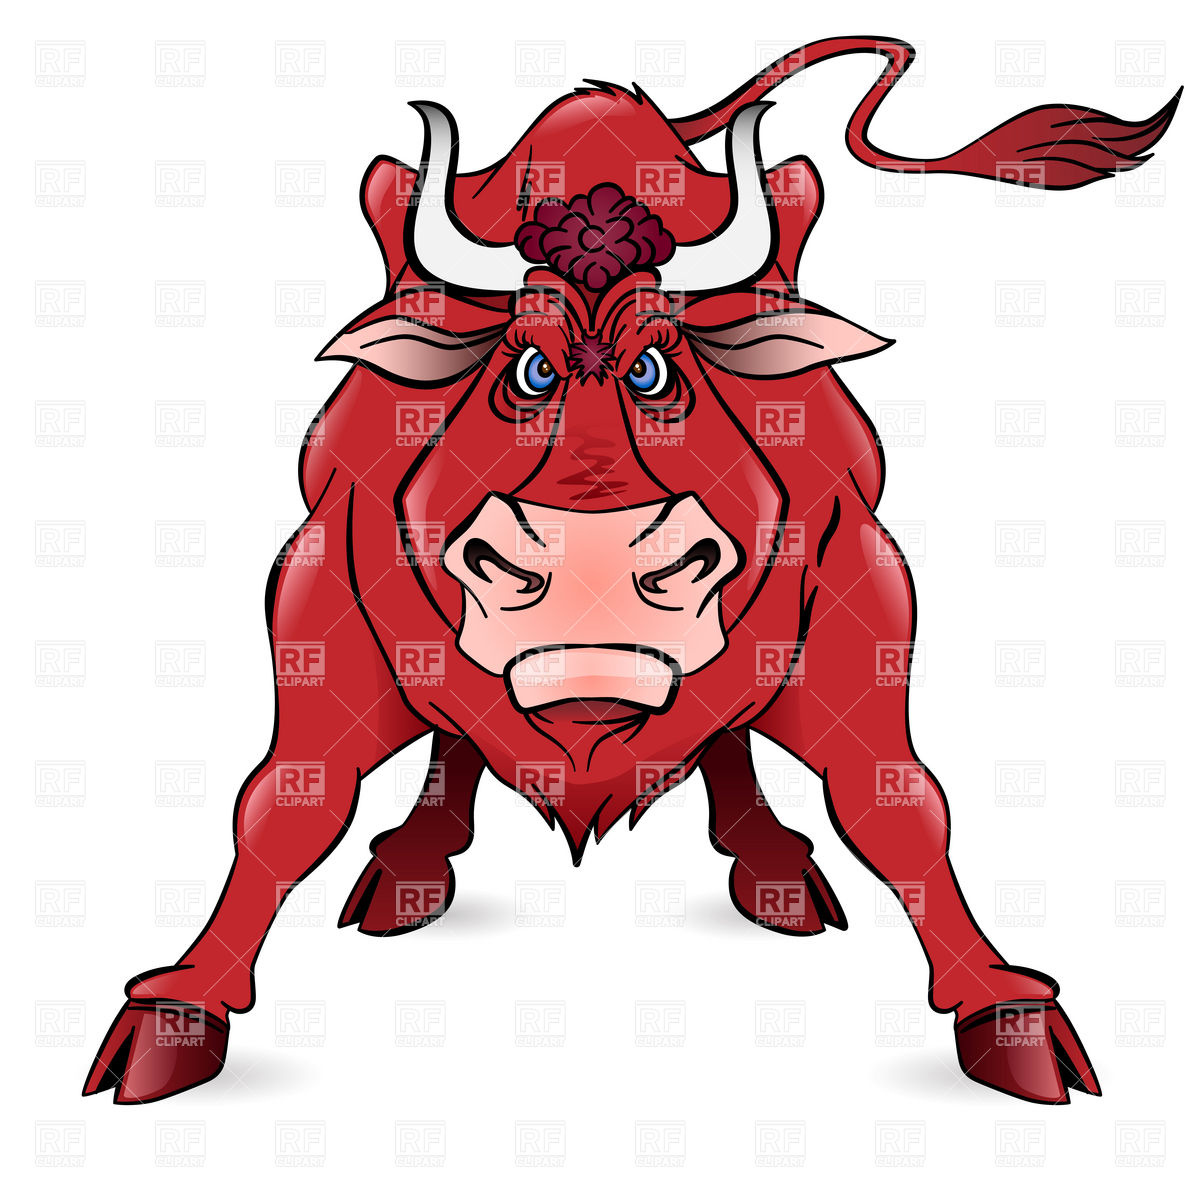 Cartoon Angry Bull Download Royalty Free Vector Clipart  Eps